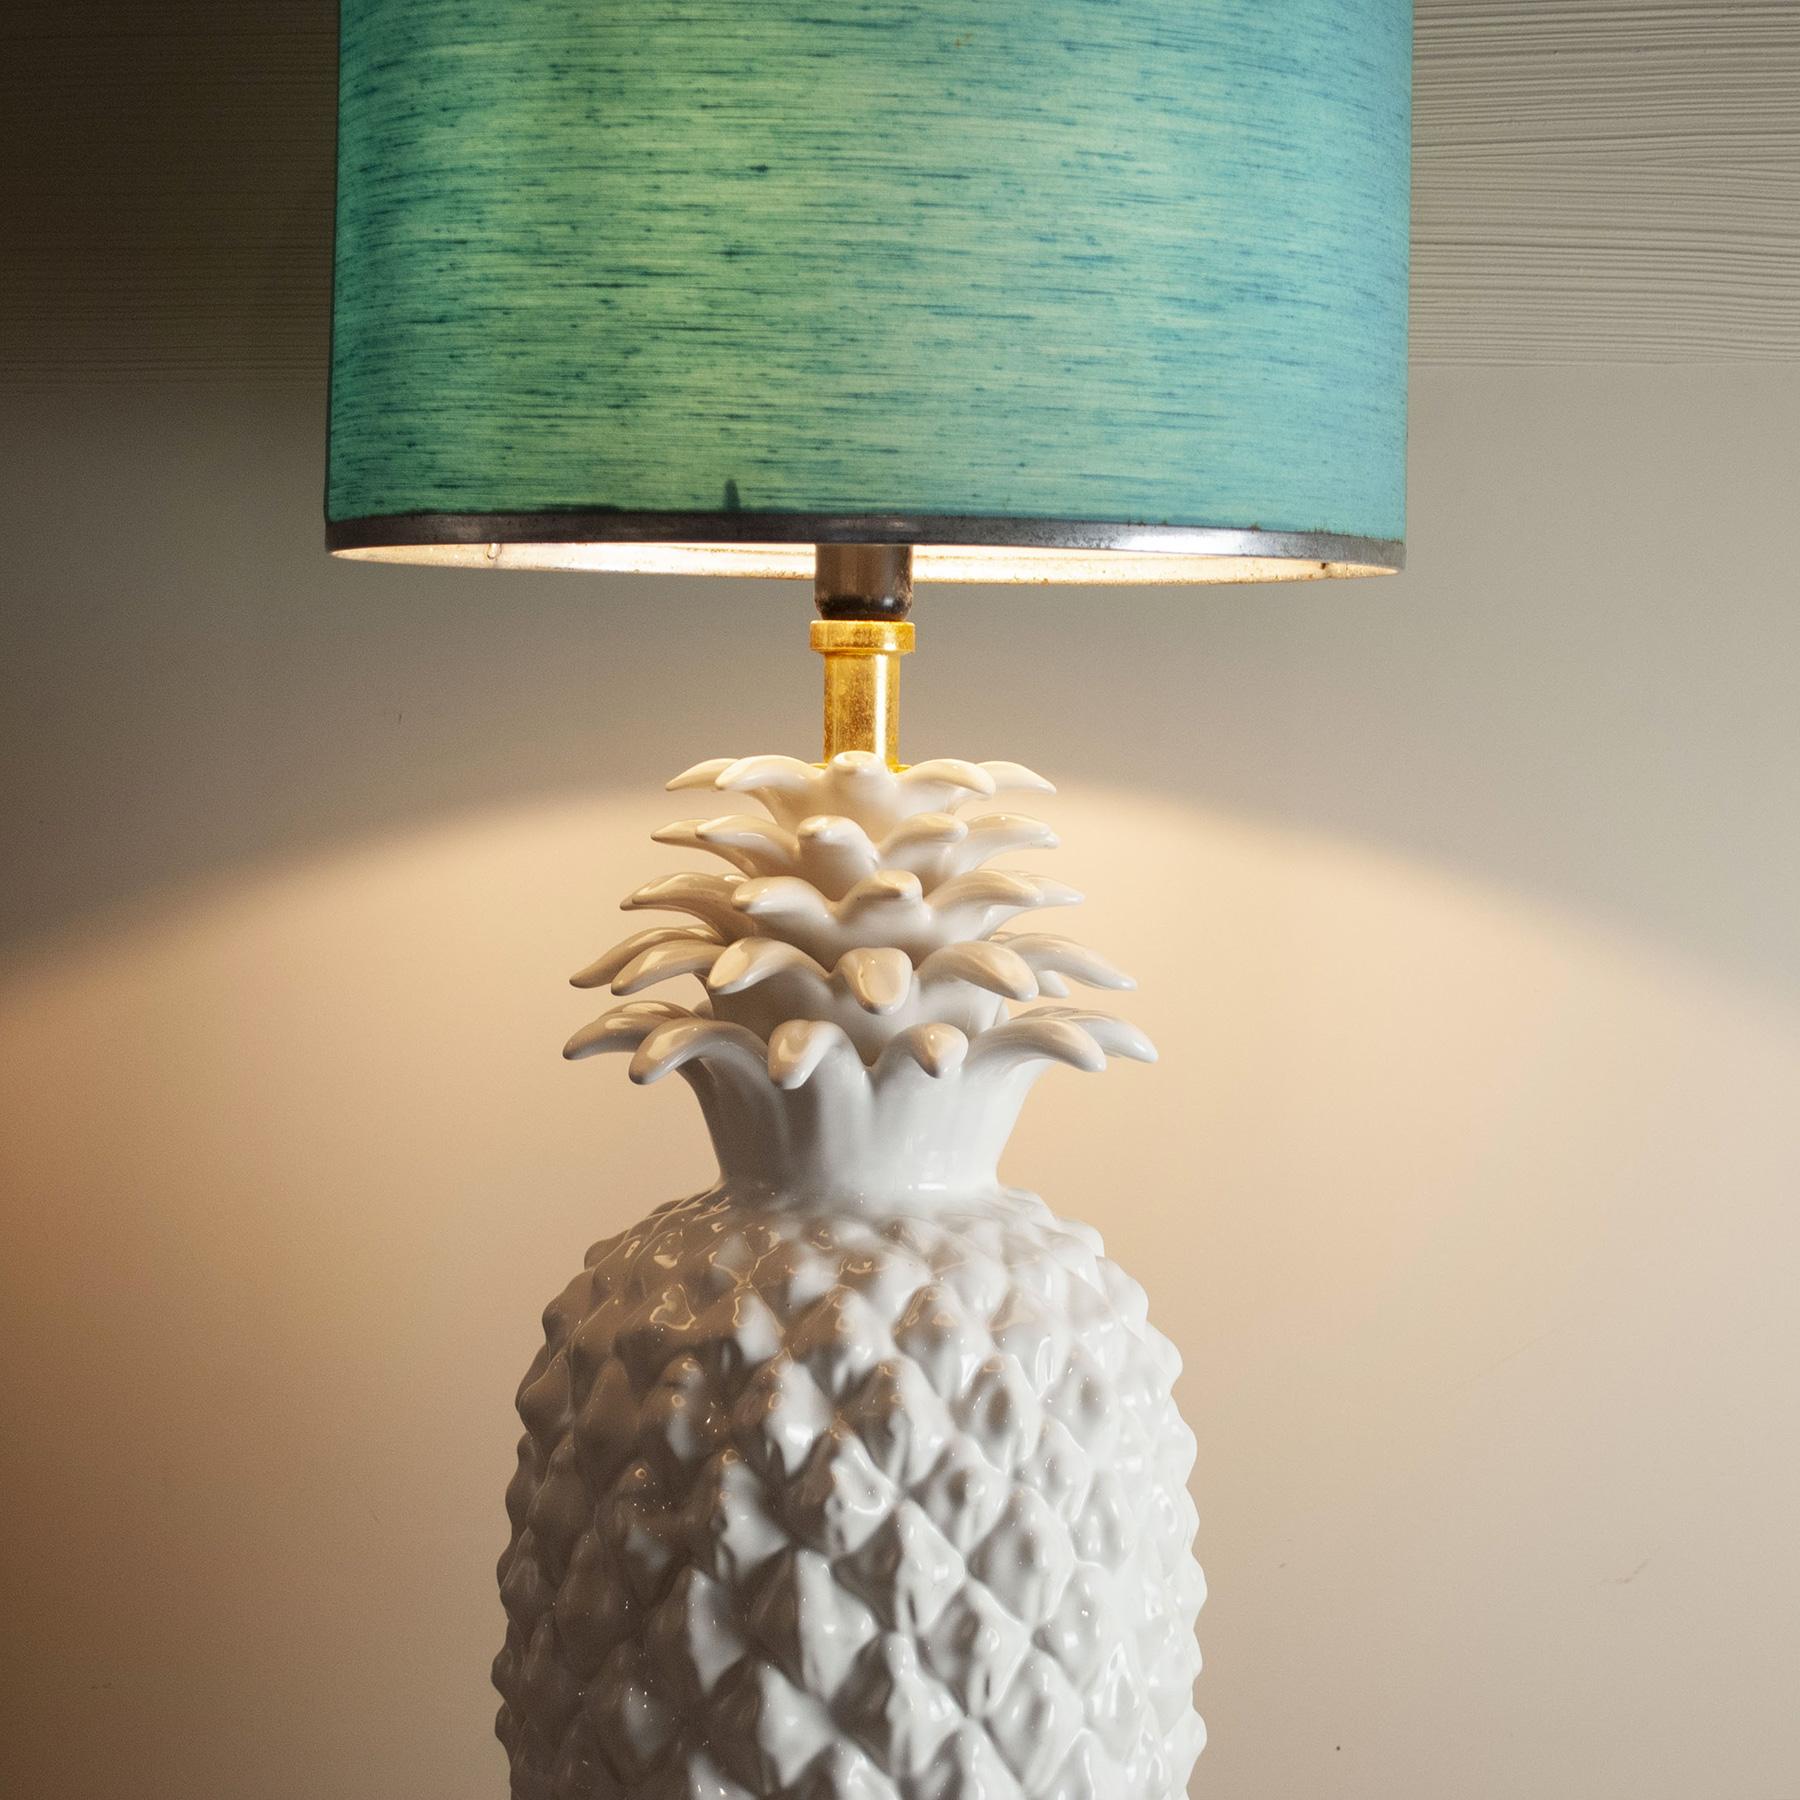 Mid-20th Century Italian 1960s White Ceramic Table Lamp Depicting the Exotic Pineapple Fruit For Sale